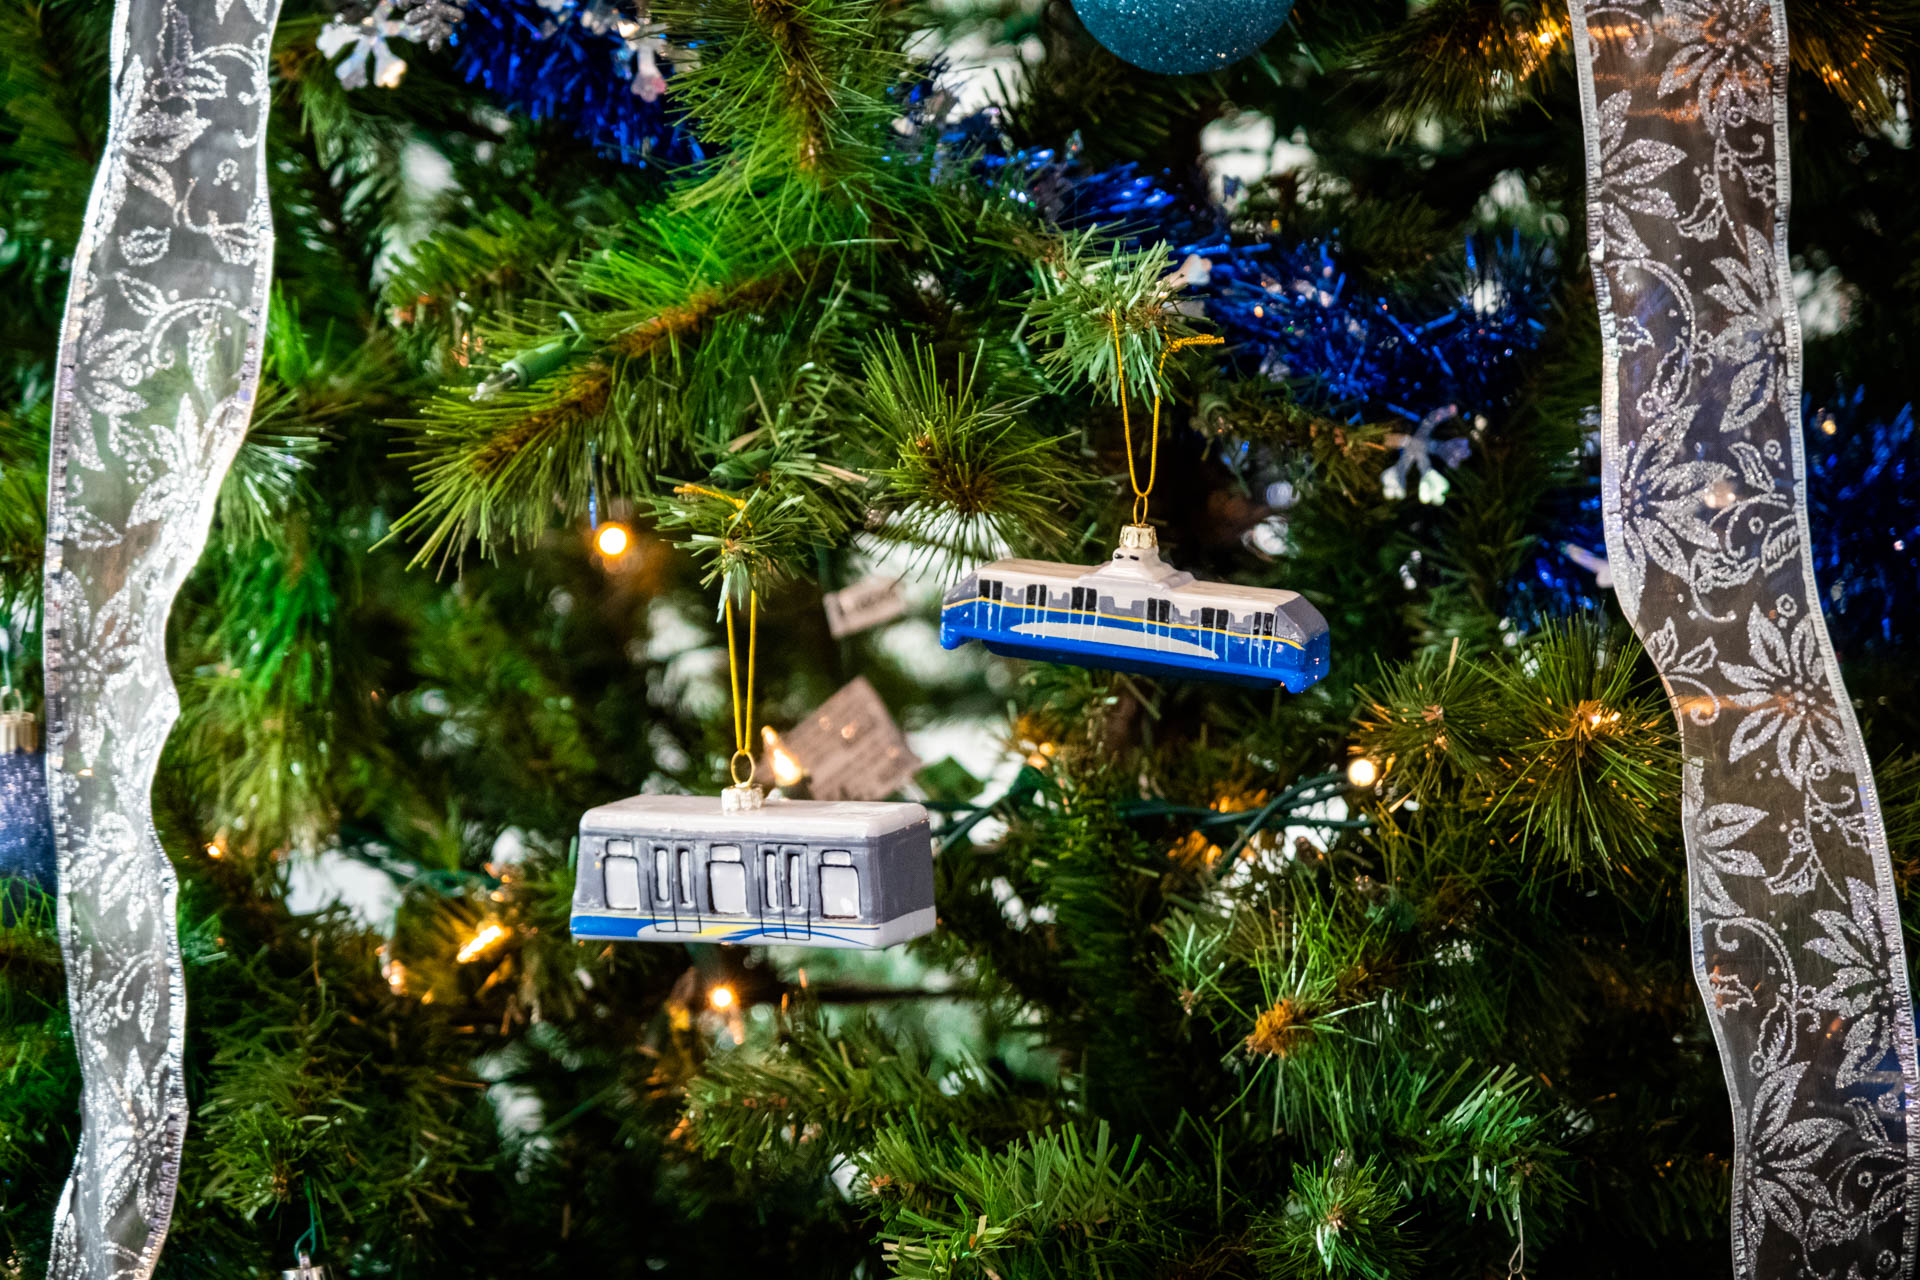 TransLink Store Hand painted Ornaments